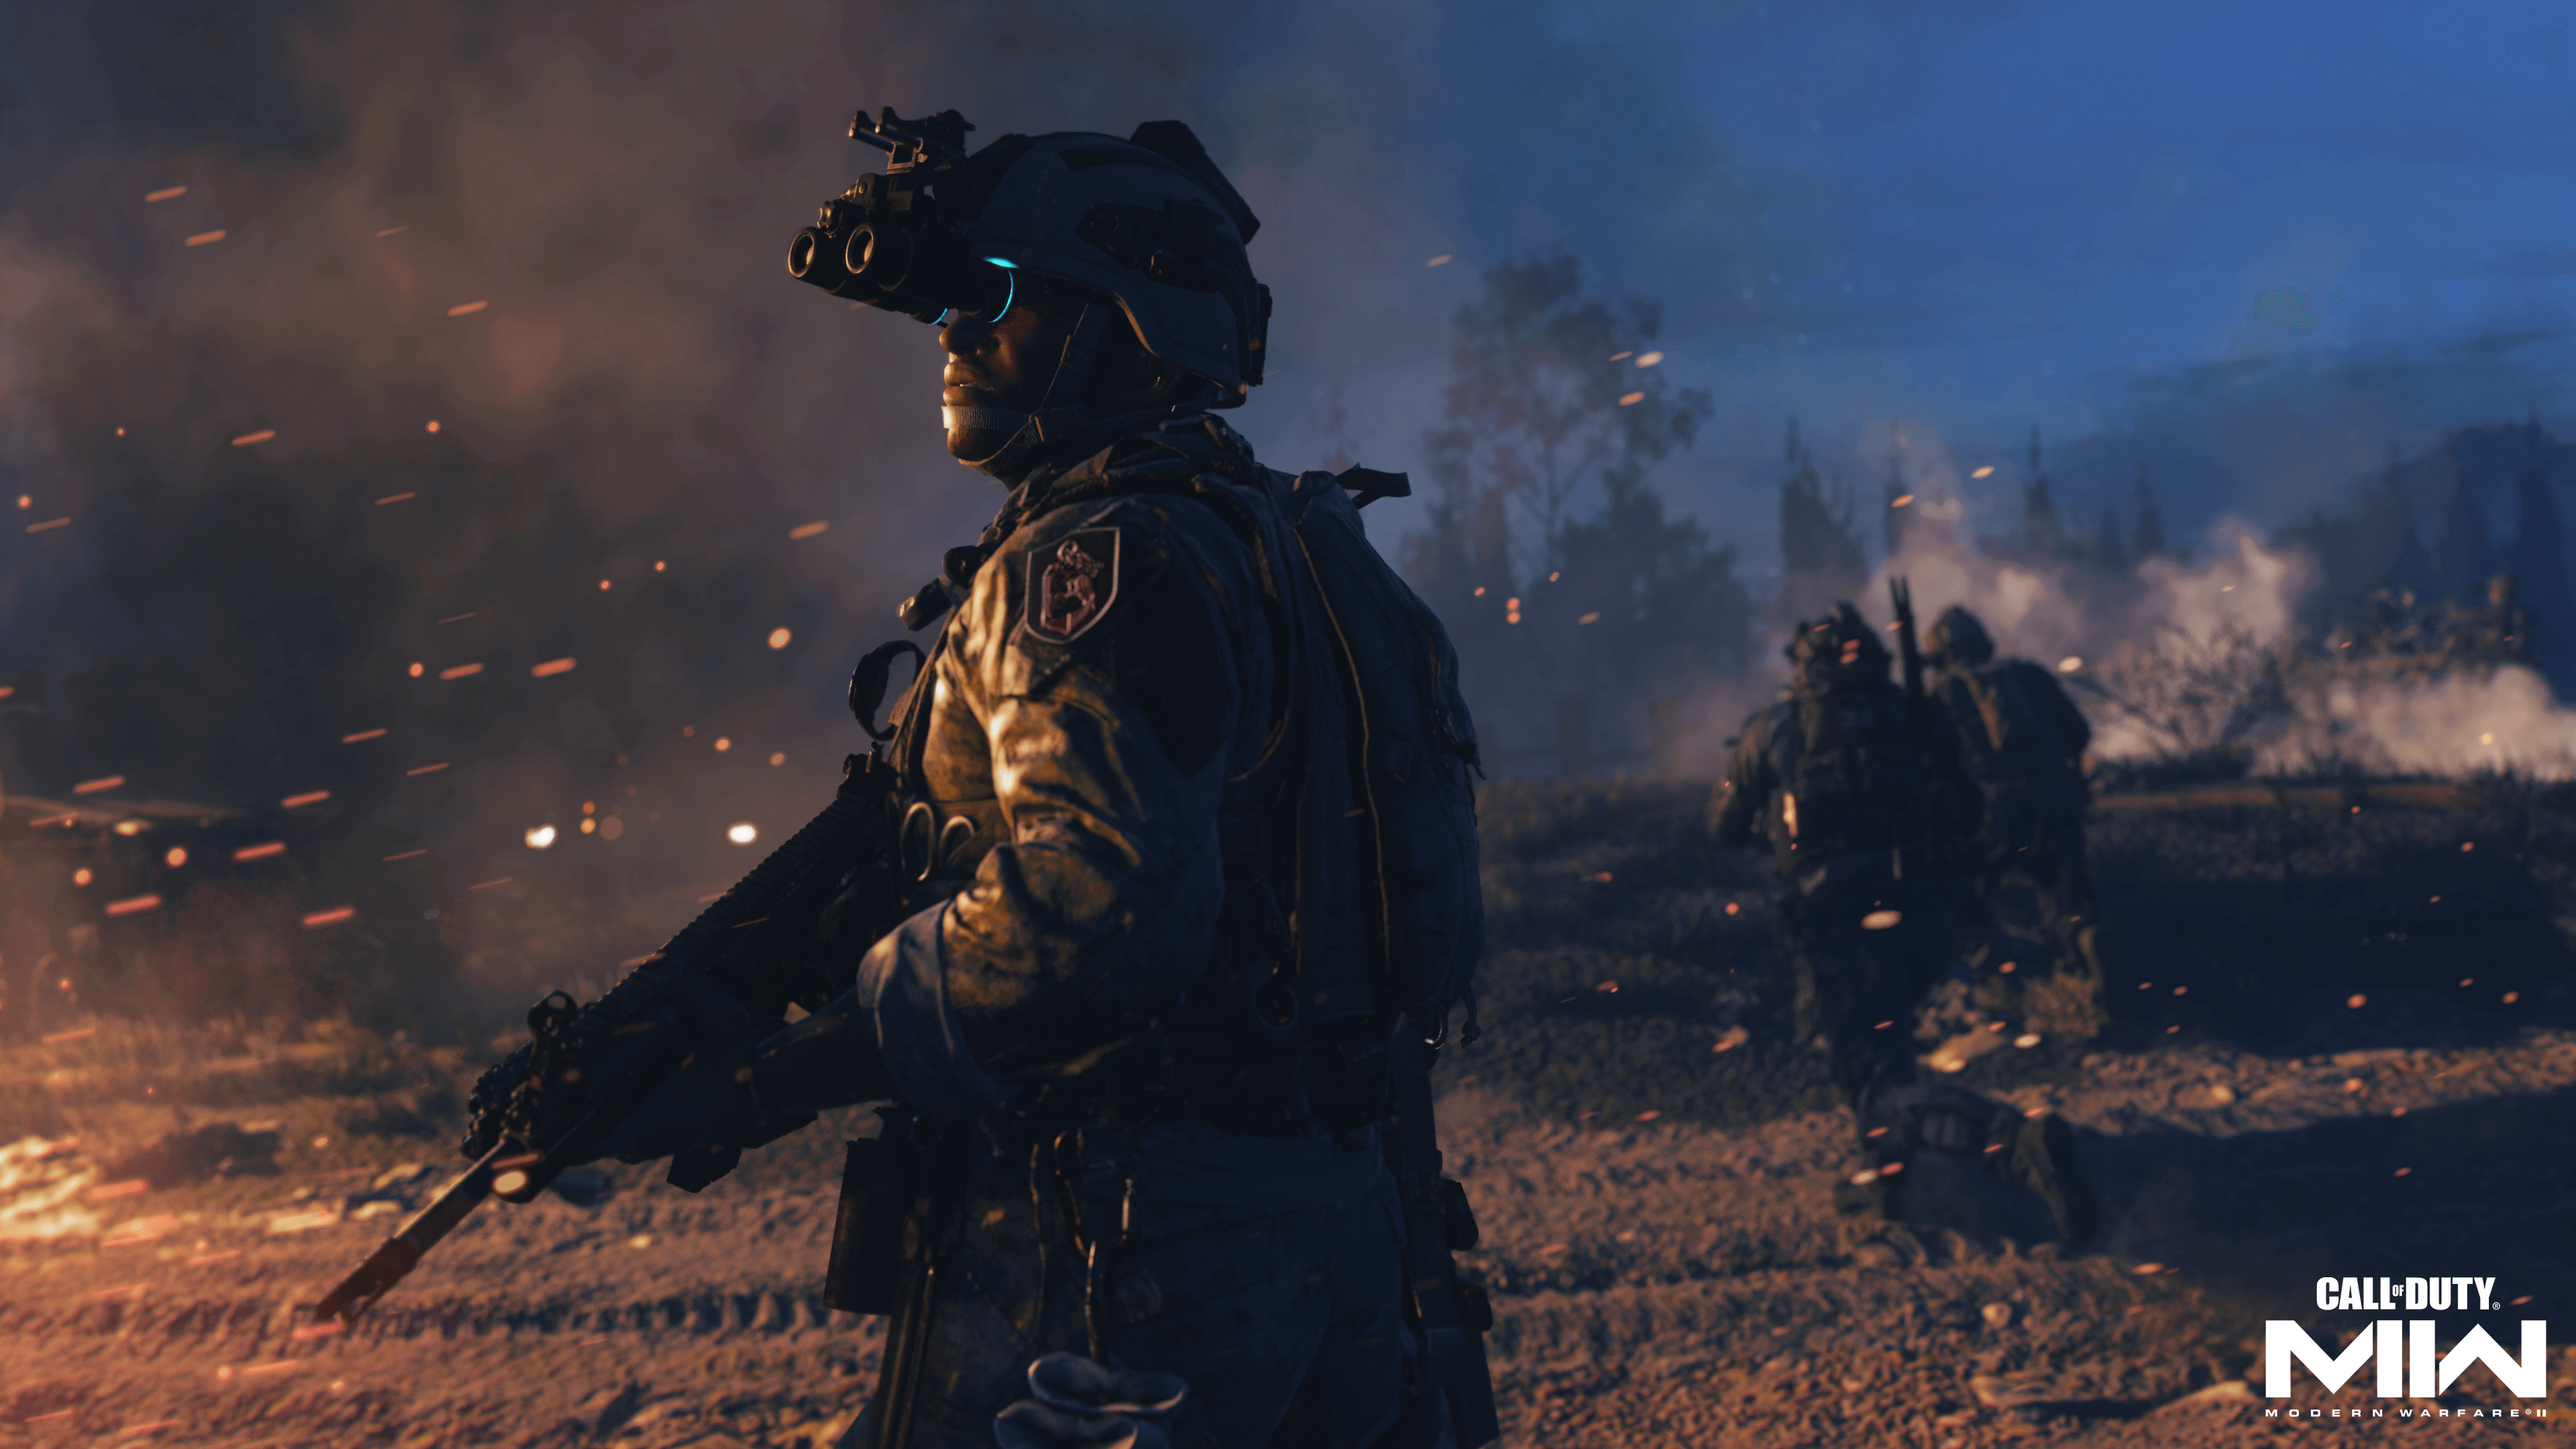 solider wearing nightvision googles looks out to the distance as the field around him is in flames